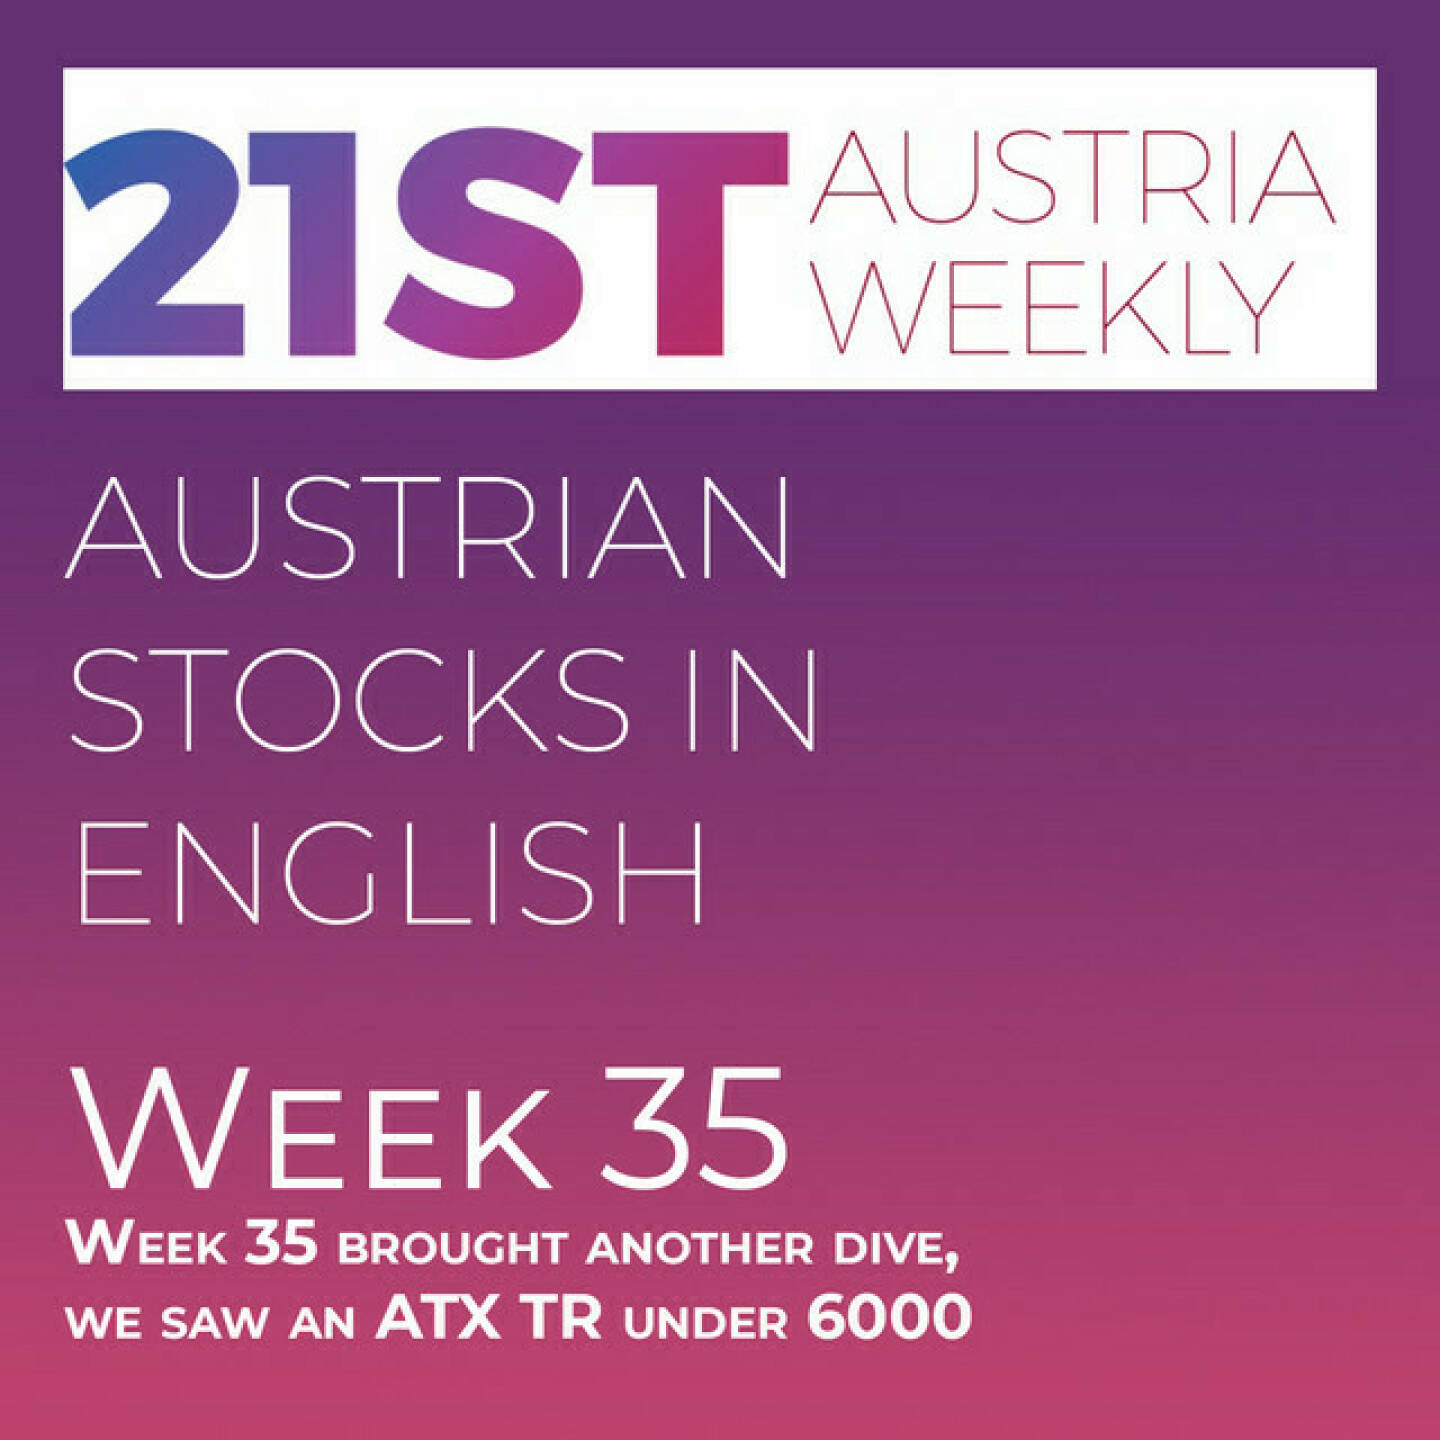 https://open.spotify.com/episode/1K3zgpfaG2BVnKb3yAIxhv
Austrian Stocks in English: Week 35 brought another dive, we saw an ATX TR under 6000 - <p>Welcome to &#34;Austrian Stocks in English - presented by Palfinger&#34;, the new and weekly english spoken Summary for the Austrian Stock Market, positioned every Sunday in the mostly german languaged Podcast &#34; Christian Drastil - Wiener Börse, Sport Musik und Mehr“ . Like last weeks Week 35 brought also a downside for ATX TR, which lost 1,98 percent to 6101,35 points. Intraweek we dived first time since Mid of July under 6000 points. News came from Pierer Mobility (2), Kontron, S Immo, Valneva, Porr, Warimpex, Semperit, Wienerberger, Strabag, Agrana, AT&amp;S, Andritz (2) and Fabasoft.</p>